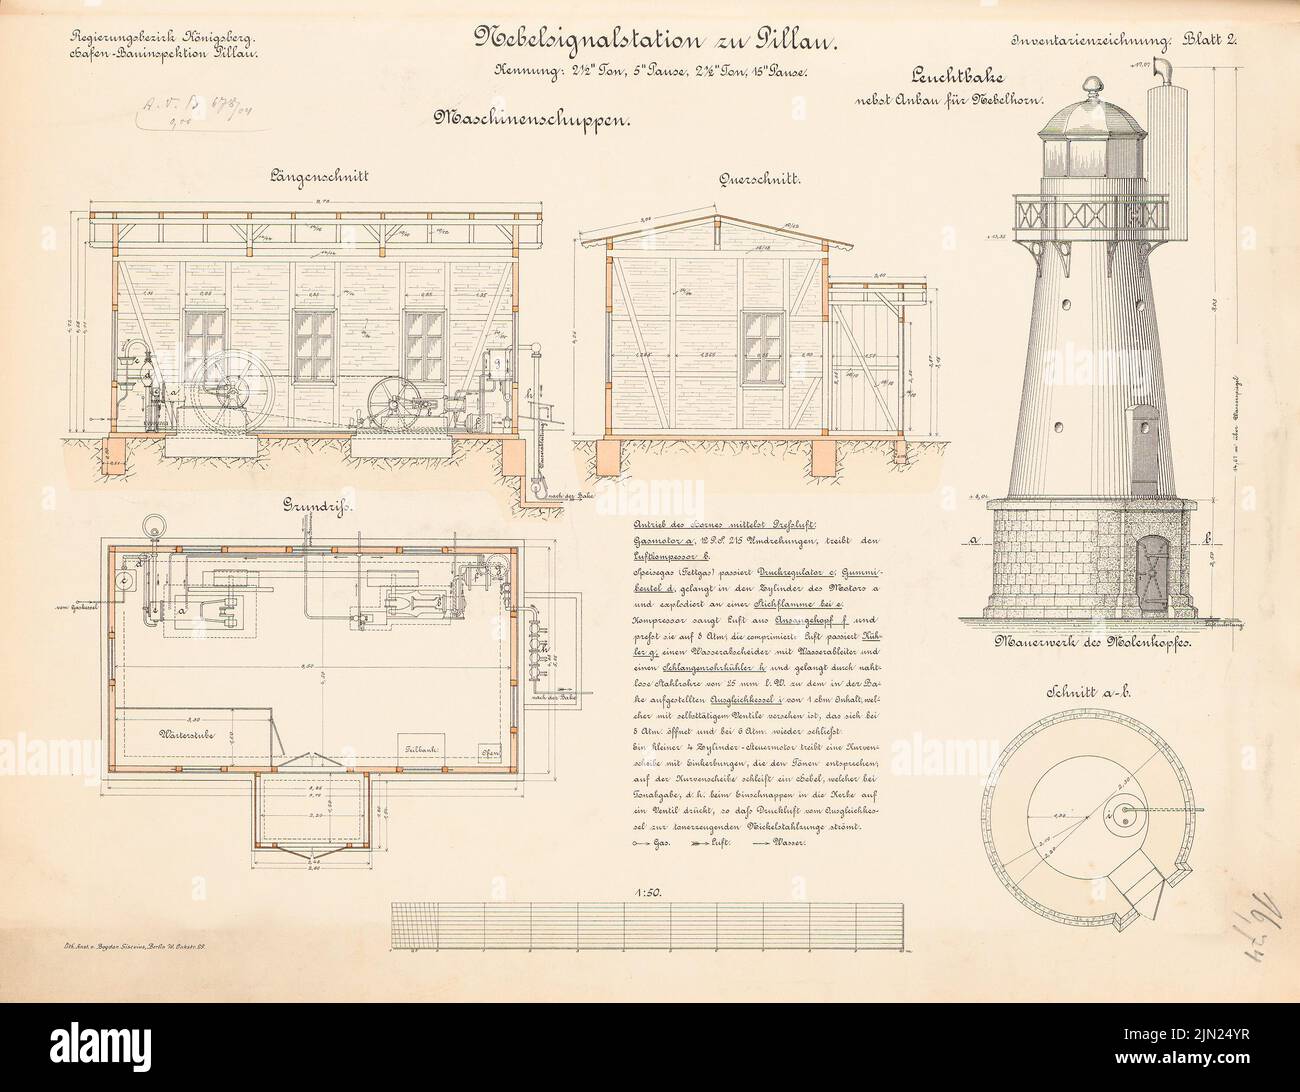 N.N., fog horn signal system, Pillau: machine shed, luminous bake: view, floor plan, cuts 1:50. Lithograph colored on paper, 42.2 x 54.7 cm (including scan edges) Stock Photo